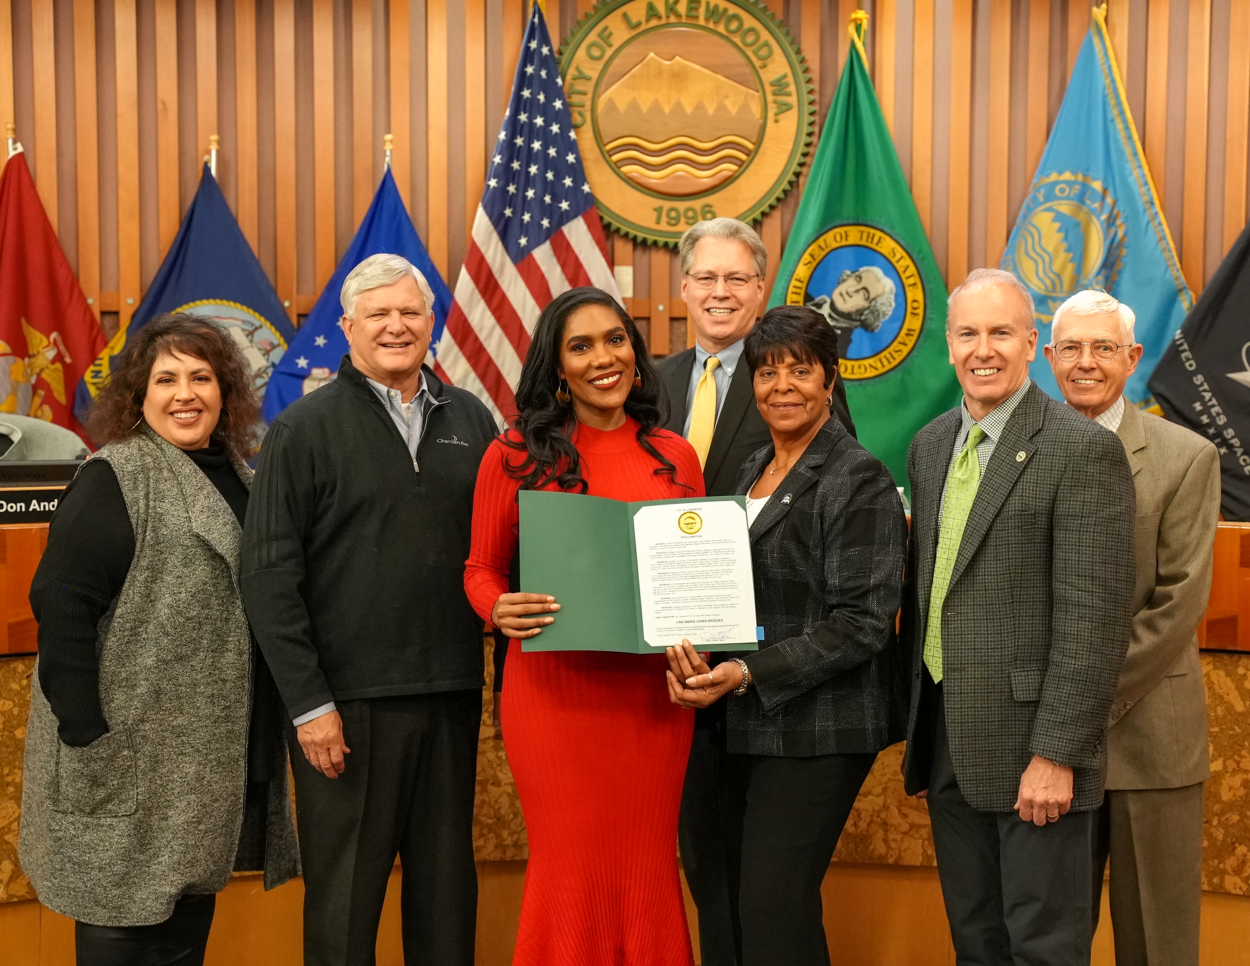 Mezzo-soprano opera singer J'Nai Bridges poses with the Lakewood City Council with a proclamation she was given by the city.